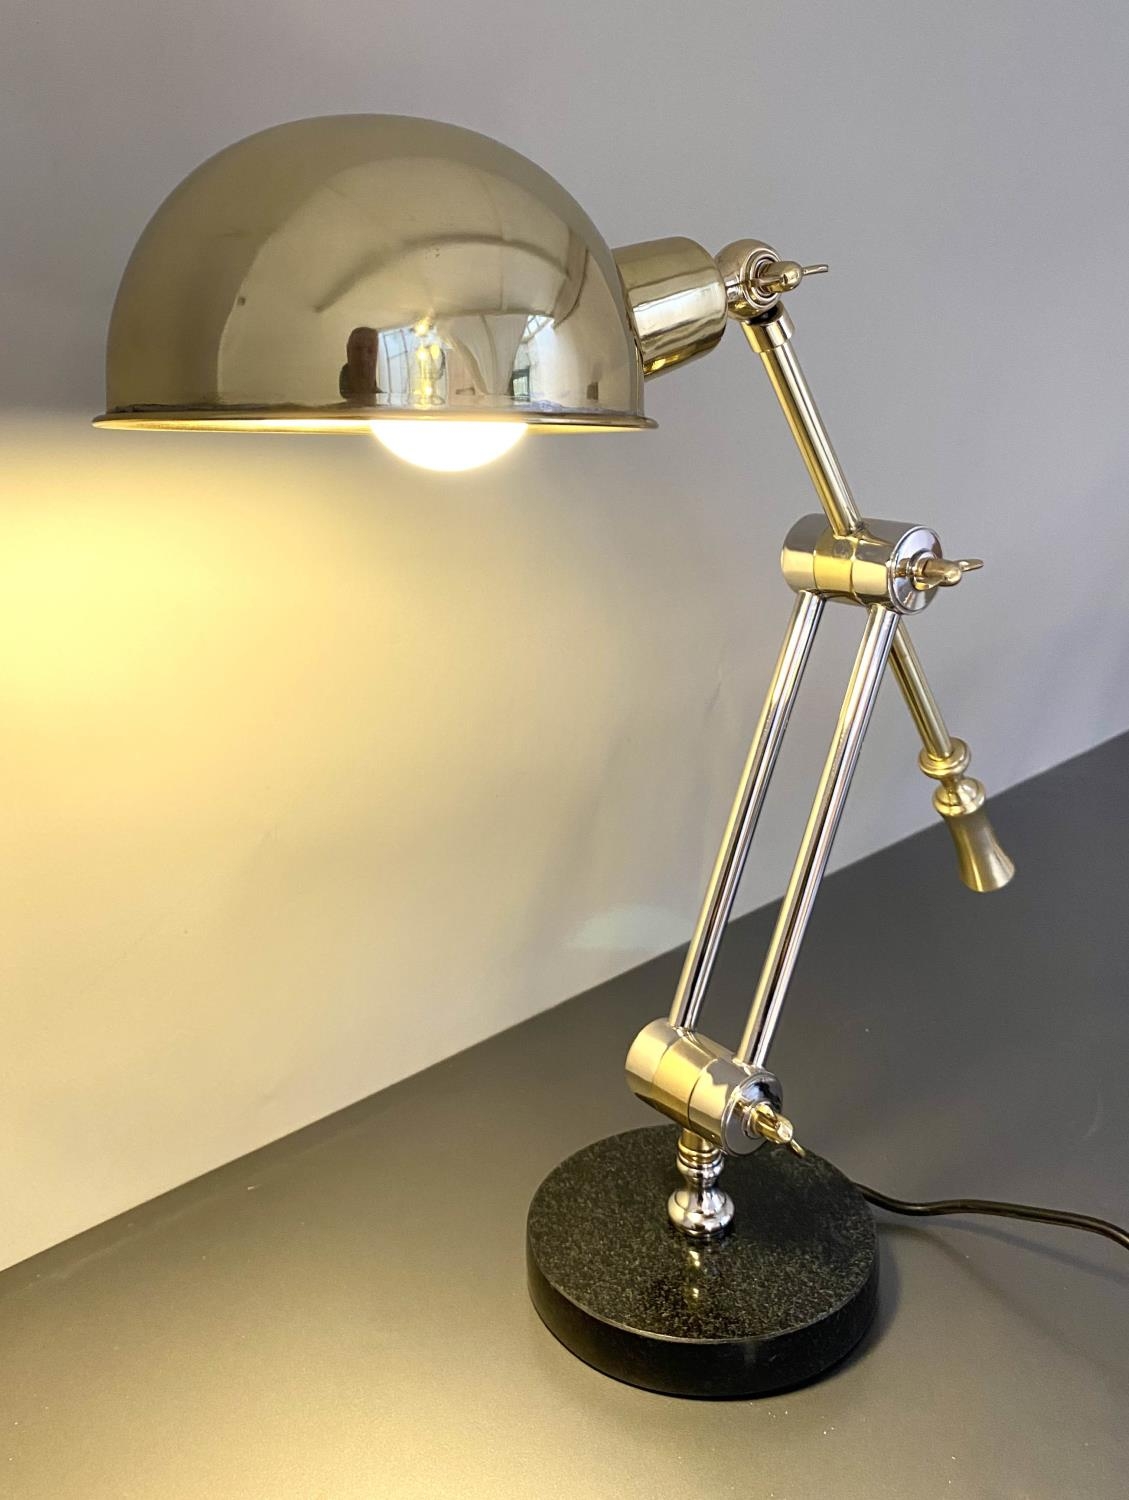 DESK LAMP, Angle-poise style, gilt metal frame standing on a marble base. - Image 5 of 7